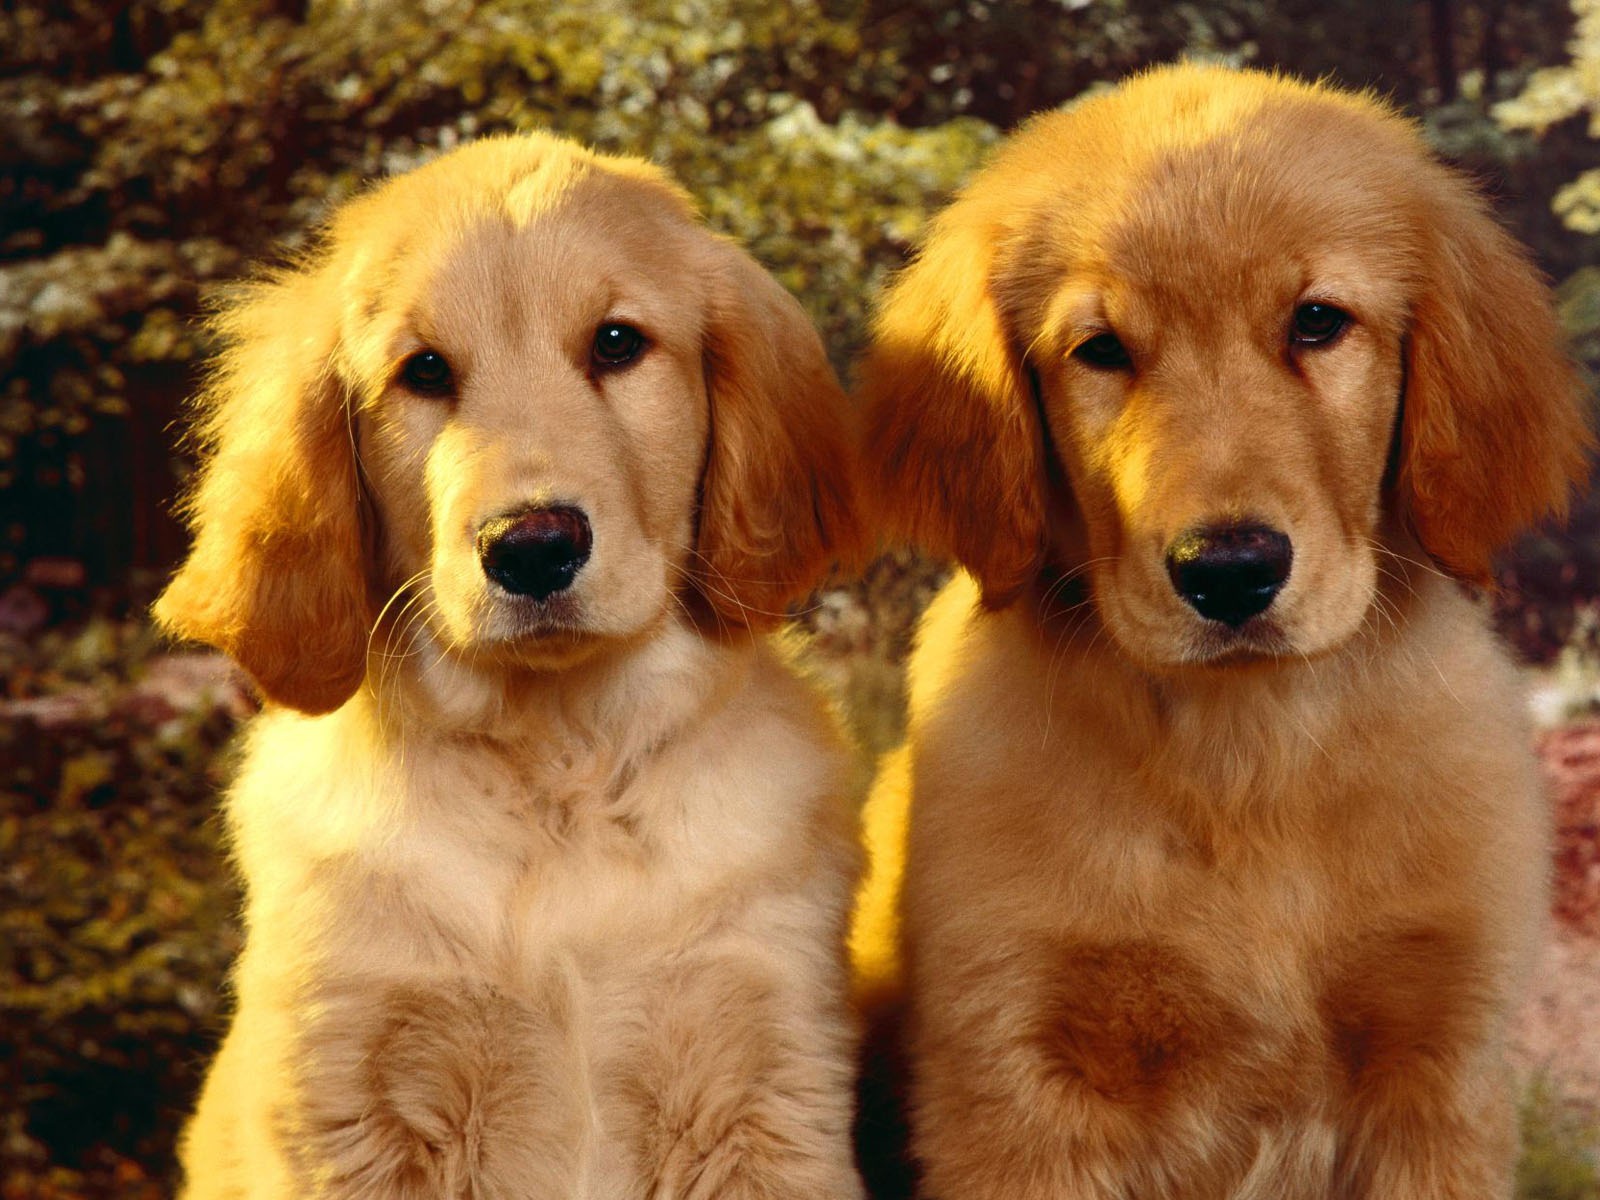 Puppy Photo HD wallpapers (2) #1 - 1600x1200